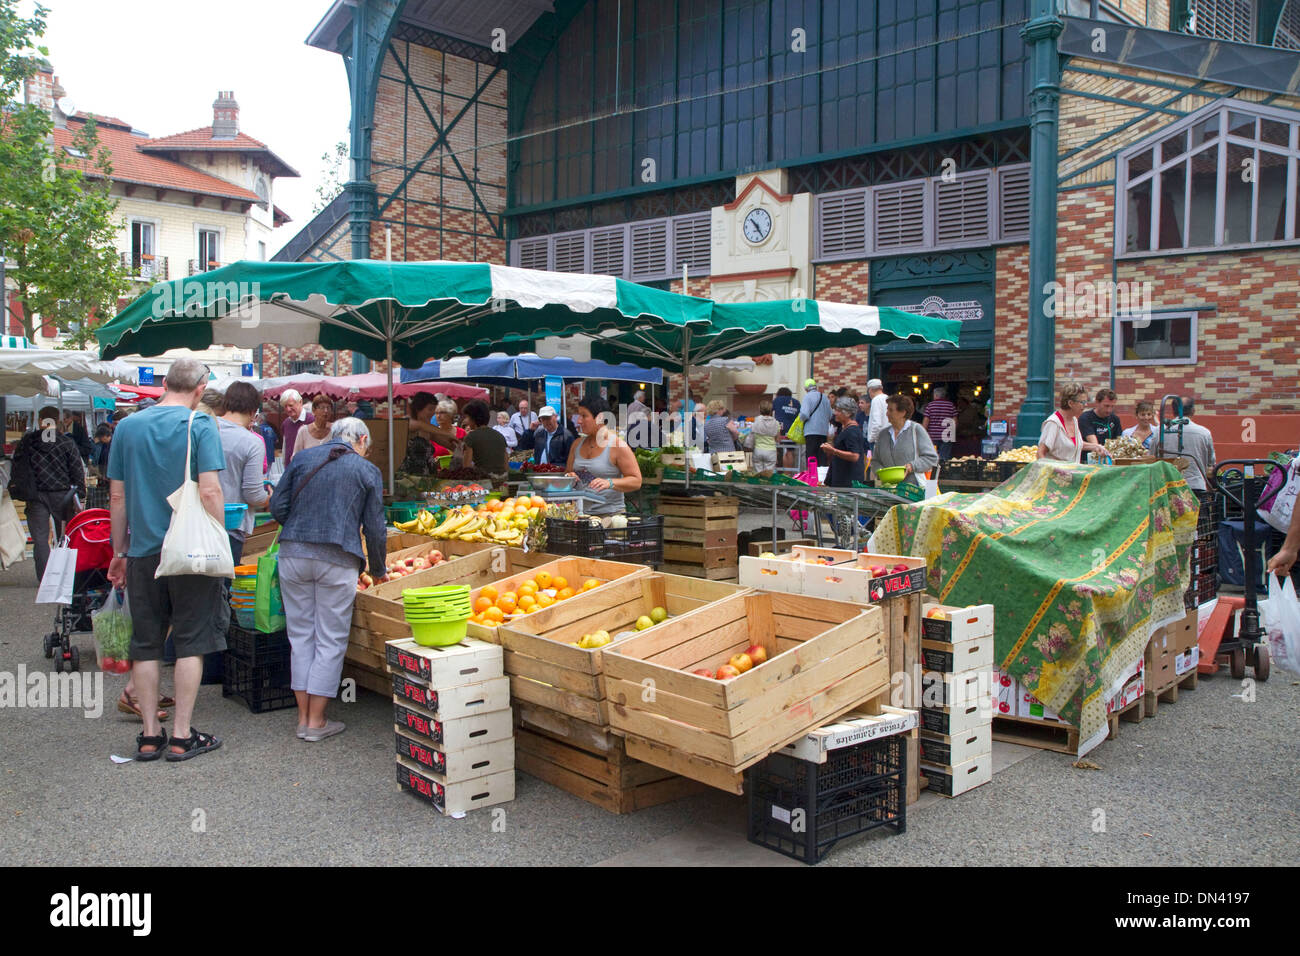 Produce being sold at an outdoor Basque market at Saint-Jean-de-Luz in the Basque province of Labourd, southwestern France. Stock Photo